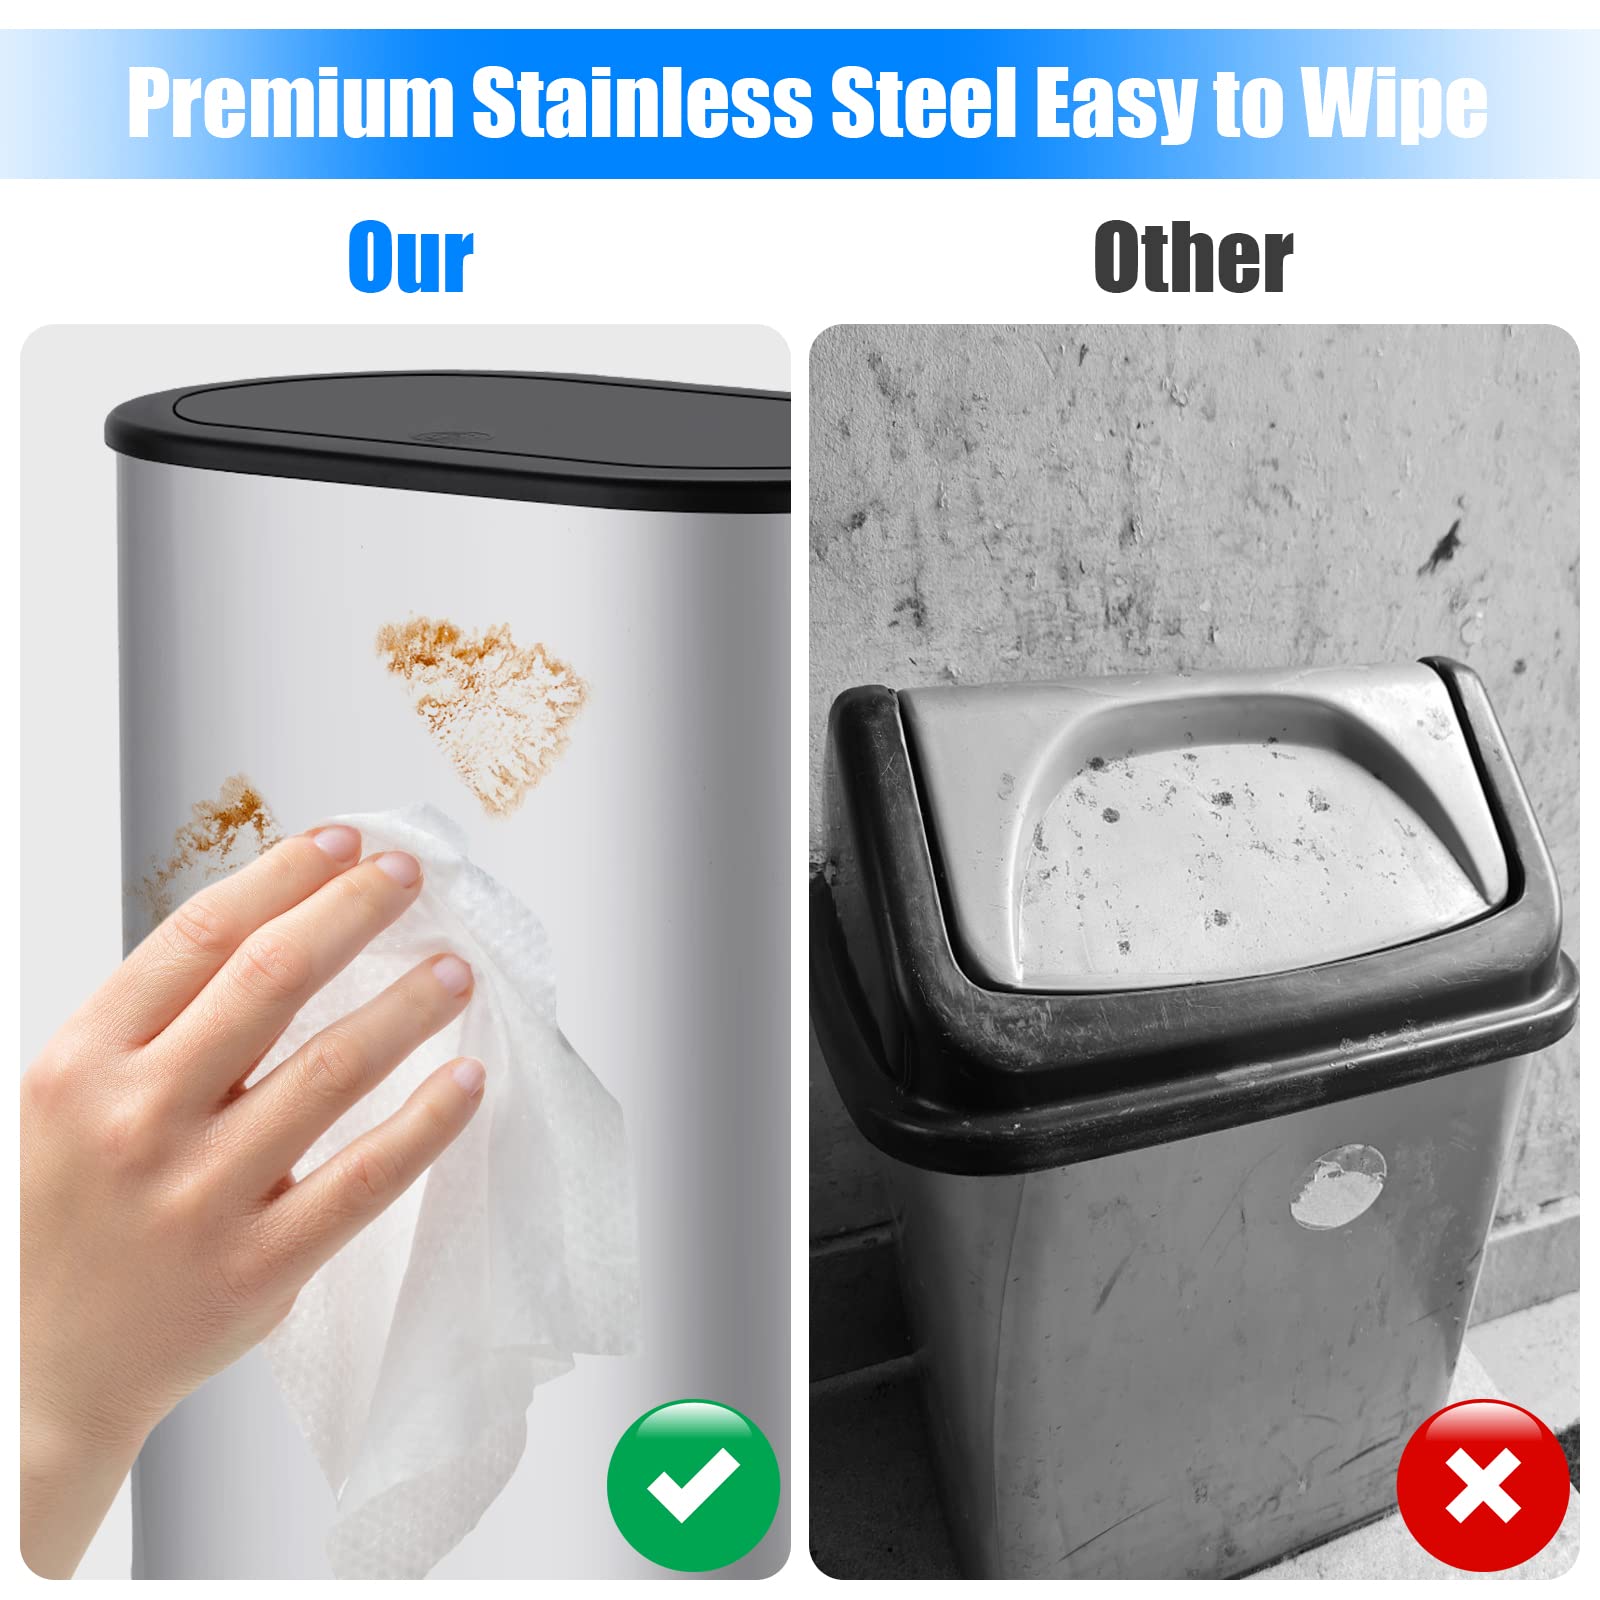 Anzoymx Stainless Steel Bathroom Trash Cans 1.8 Gallons Small Garbage Can with Pop up Lid, Dog Proof Narrow Wastebasket, Slim Waterproof Litter Trash Bins Set for Bedroom, Toilet, Office (Silver)